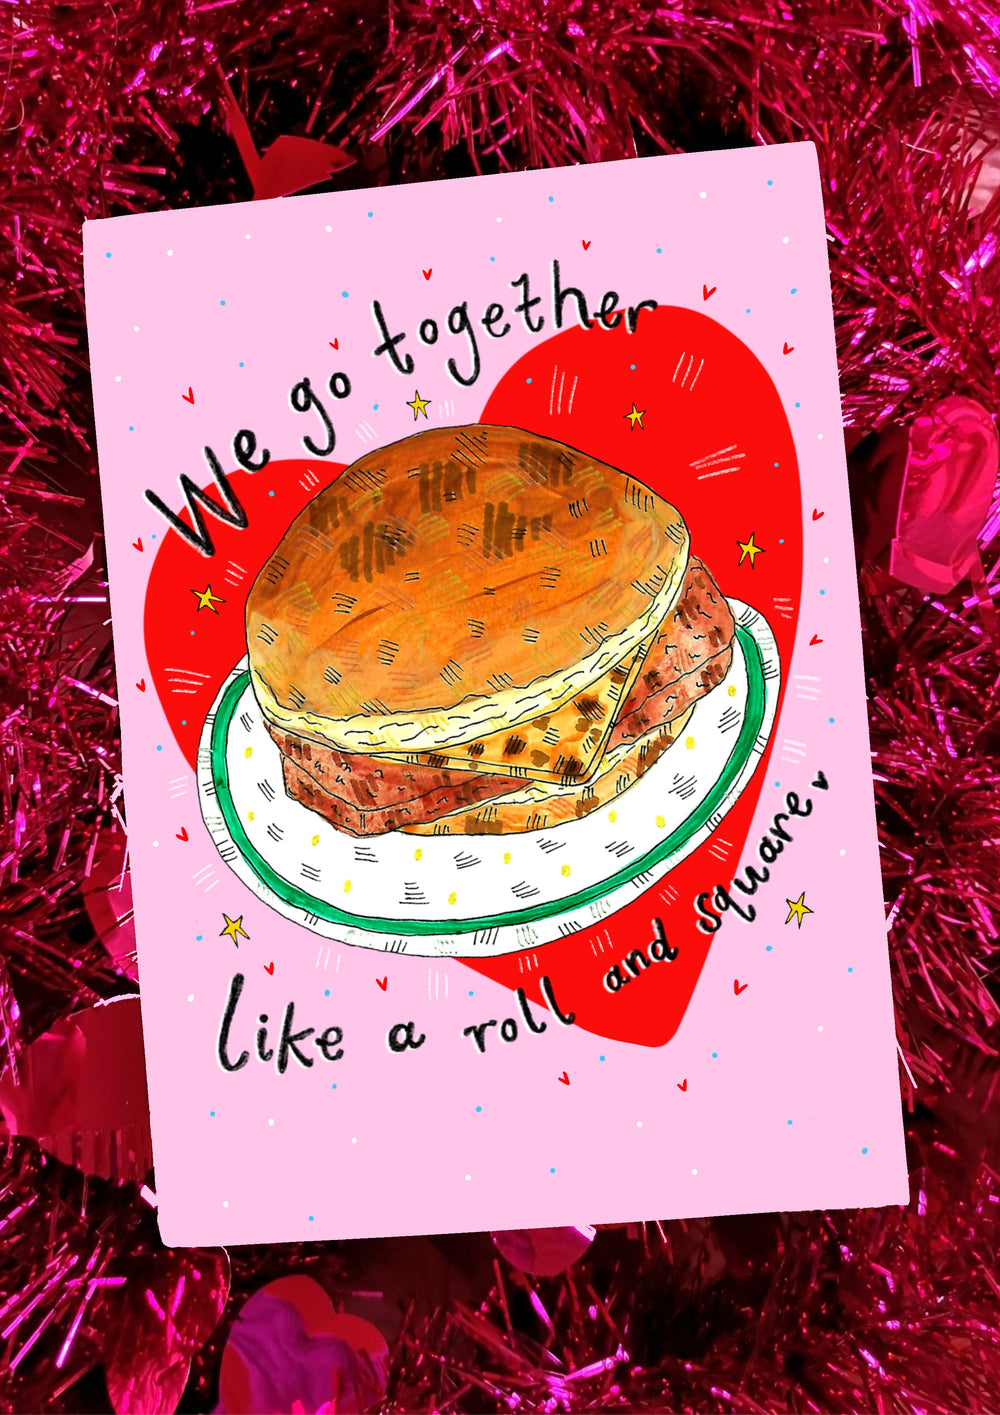 We go together like a roll and square! Greetings Card